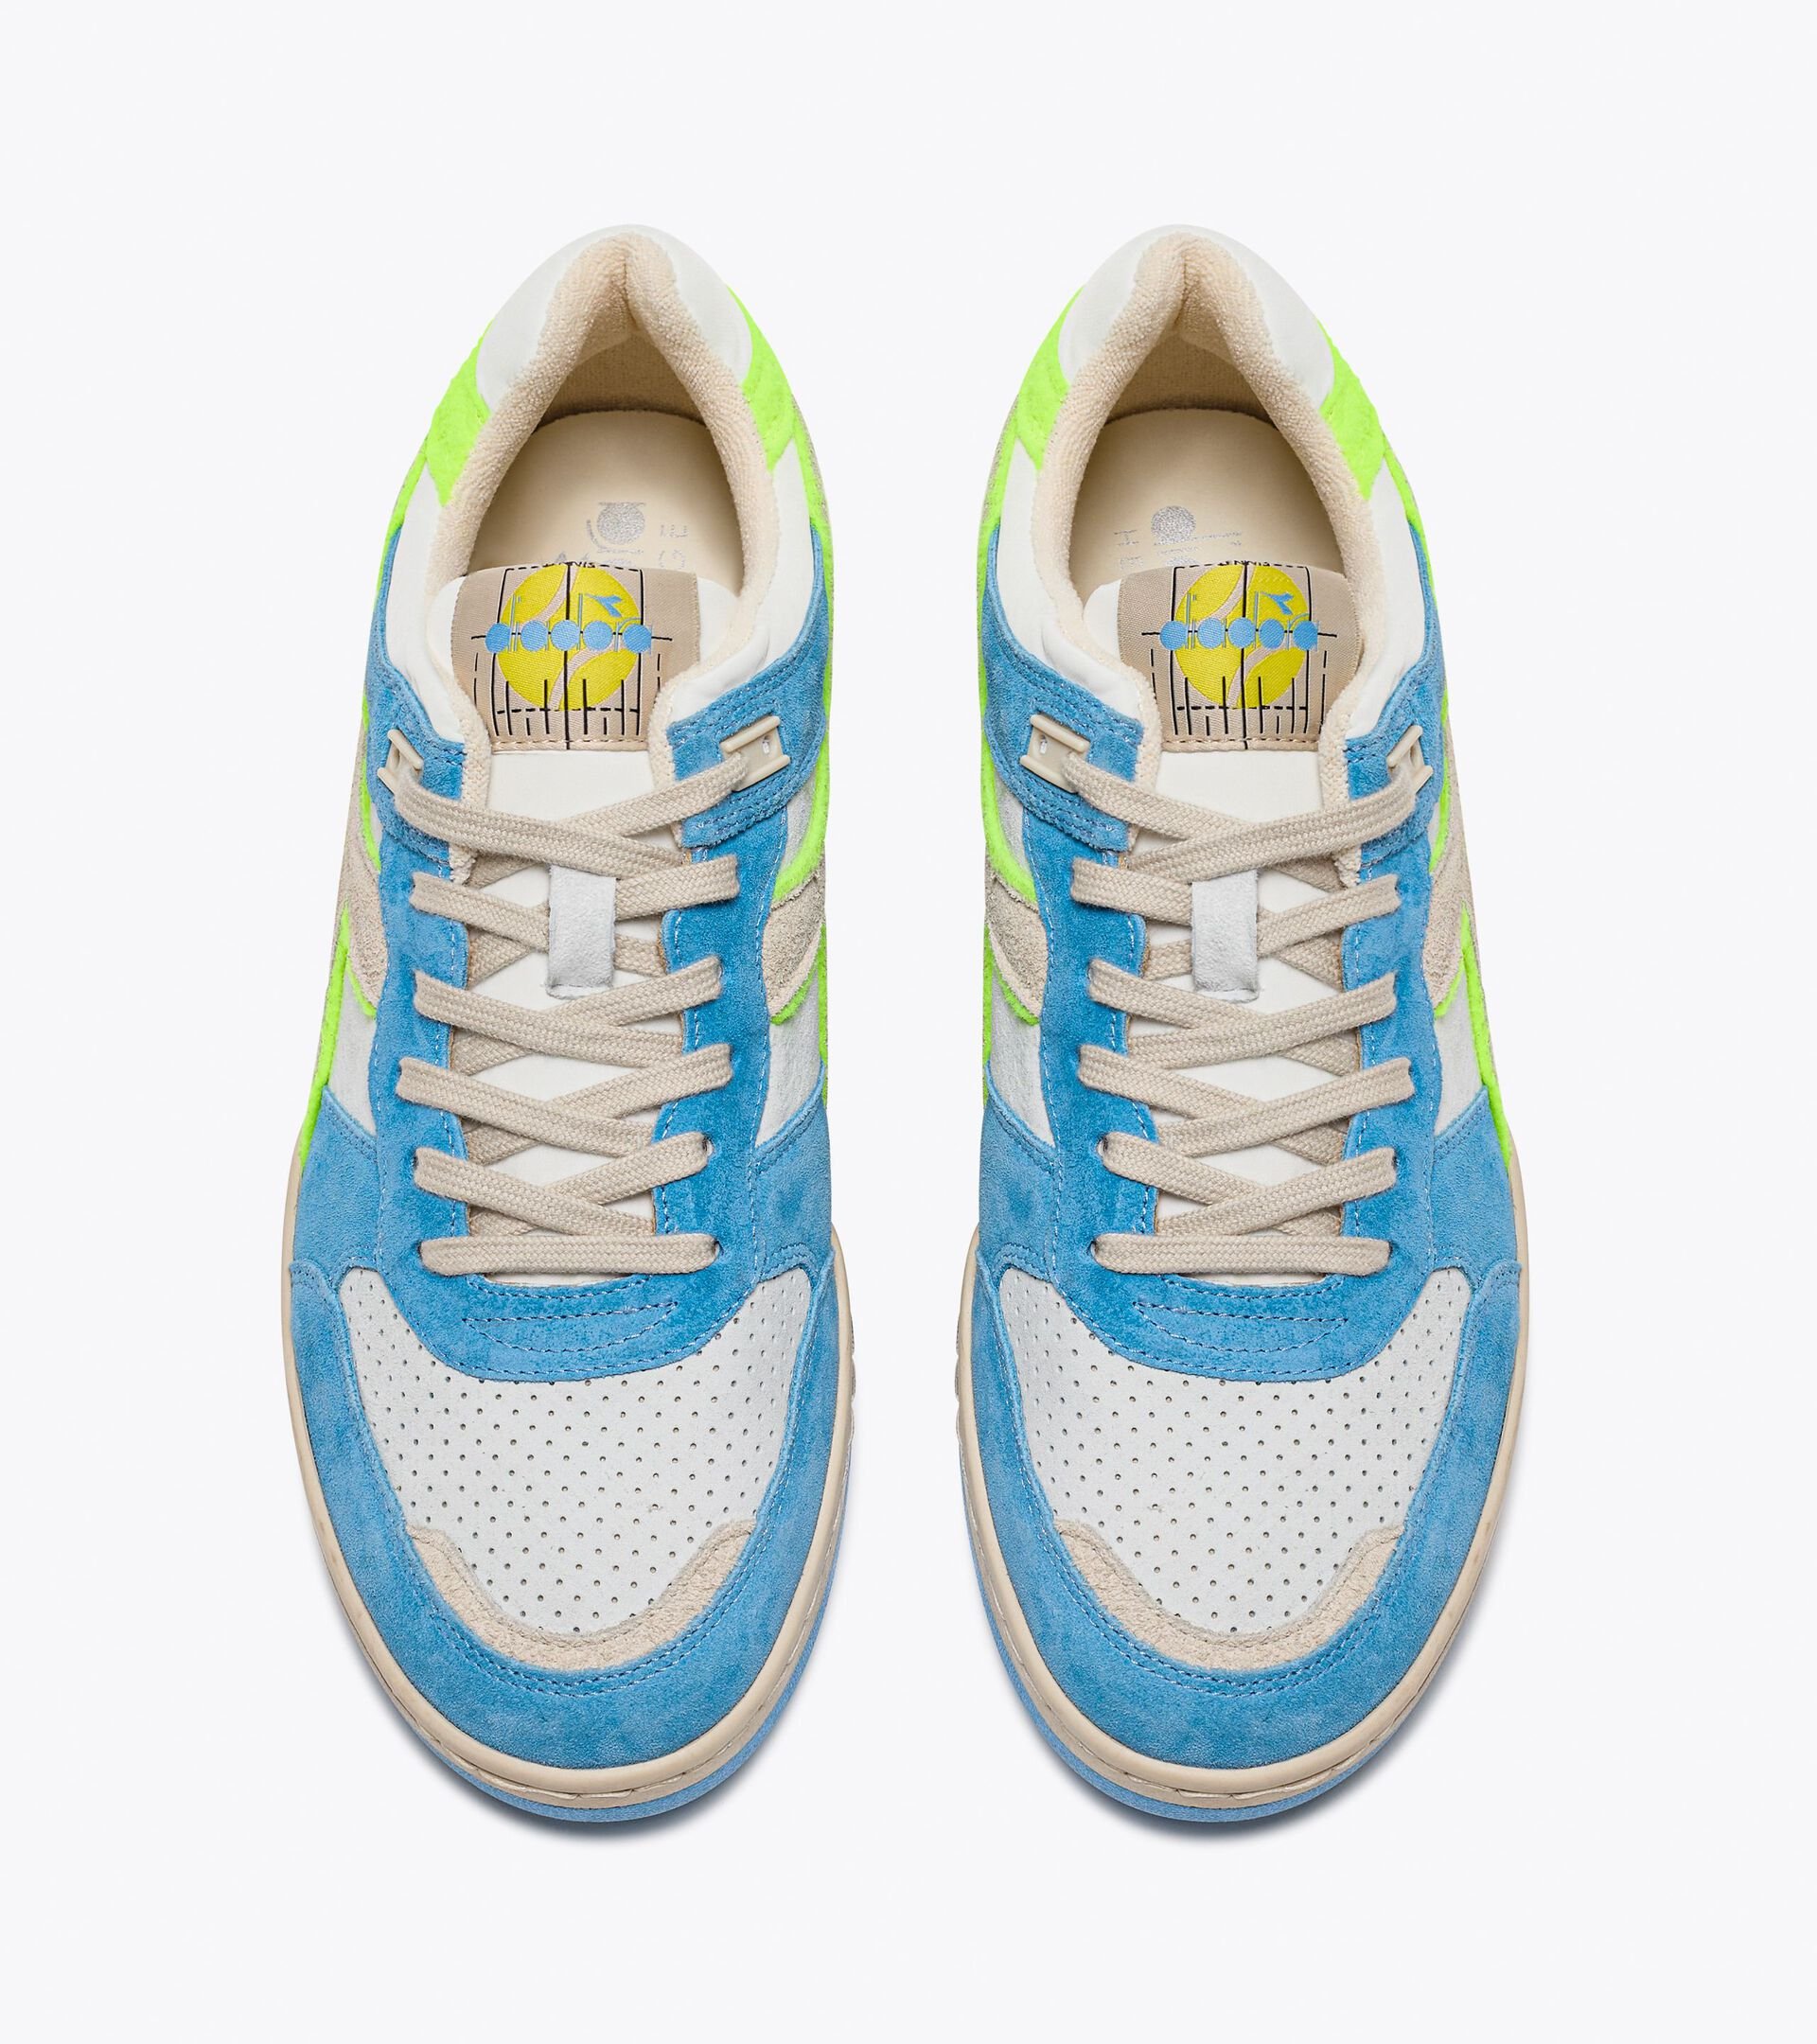 Heritage sneakers - Made in Italy - Gender Neutral 
 B.560 USED AA ITALIA WHITE/BONNIE BLUE - Diadora